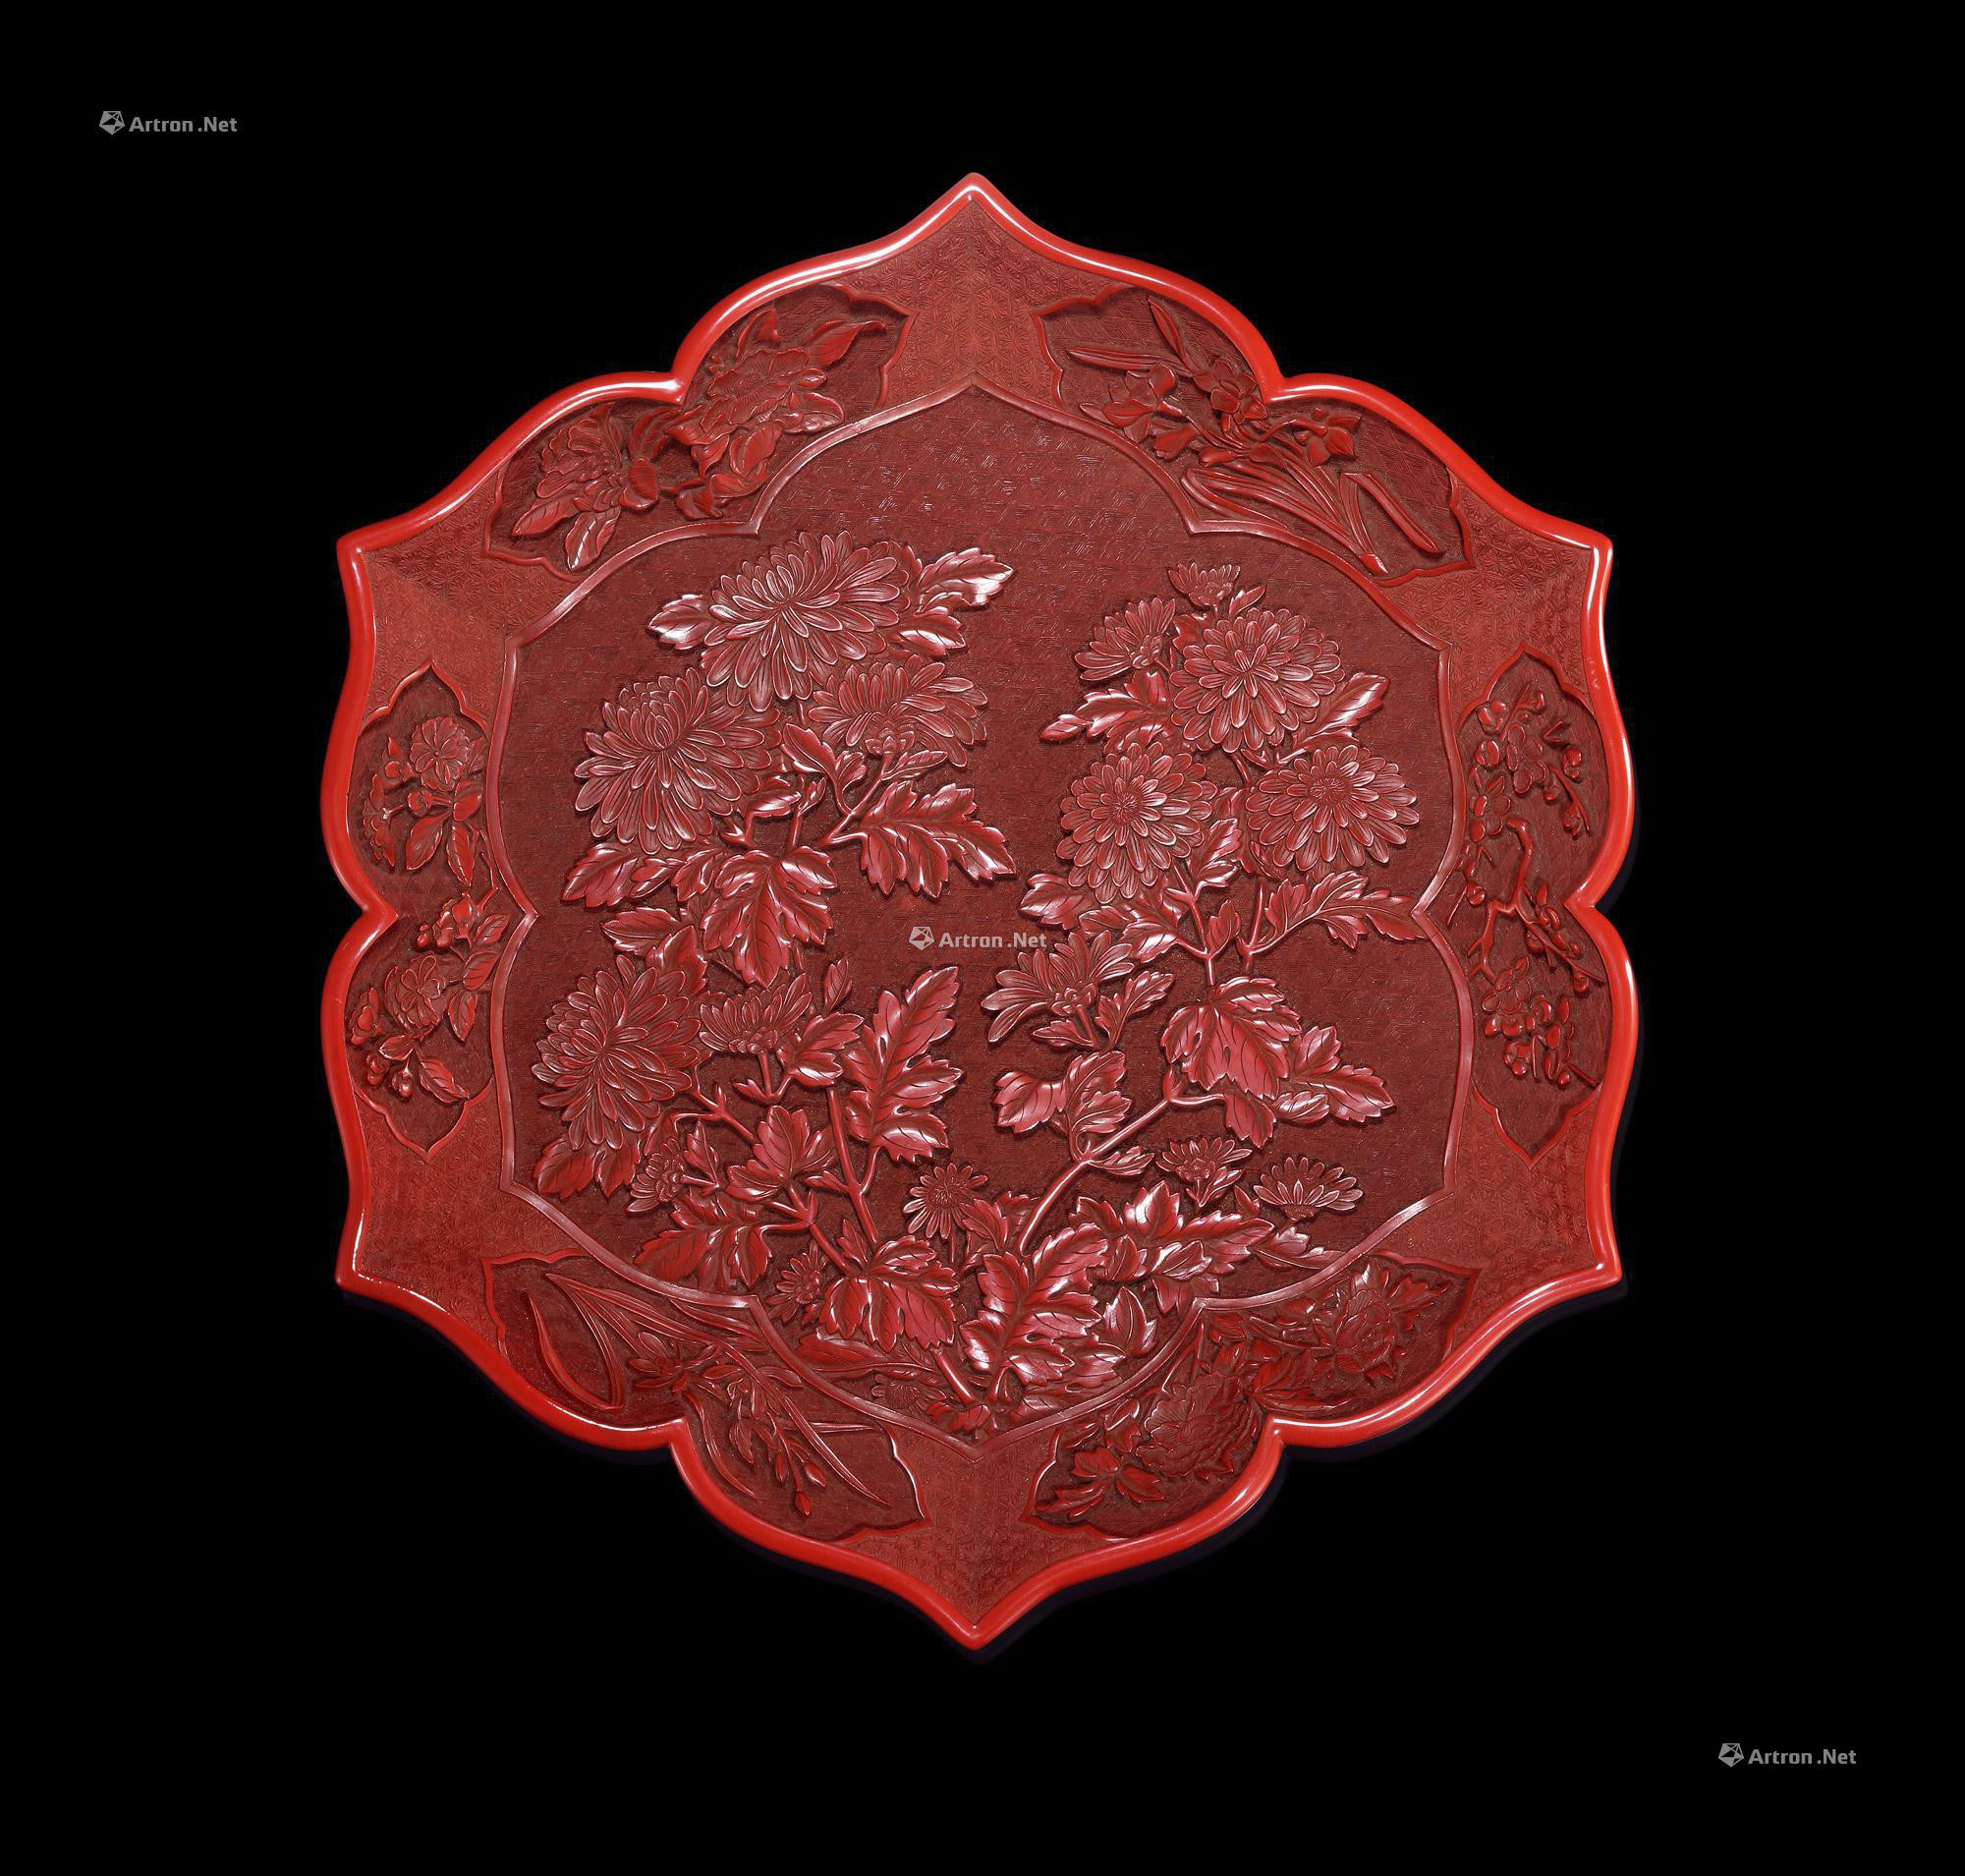 A CARVED RED LACQUER WARE PLATE